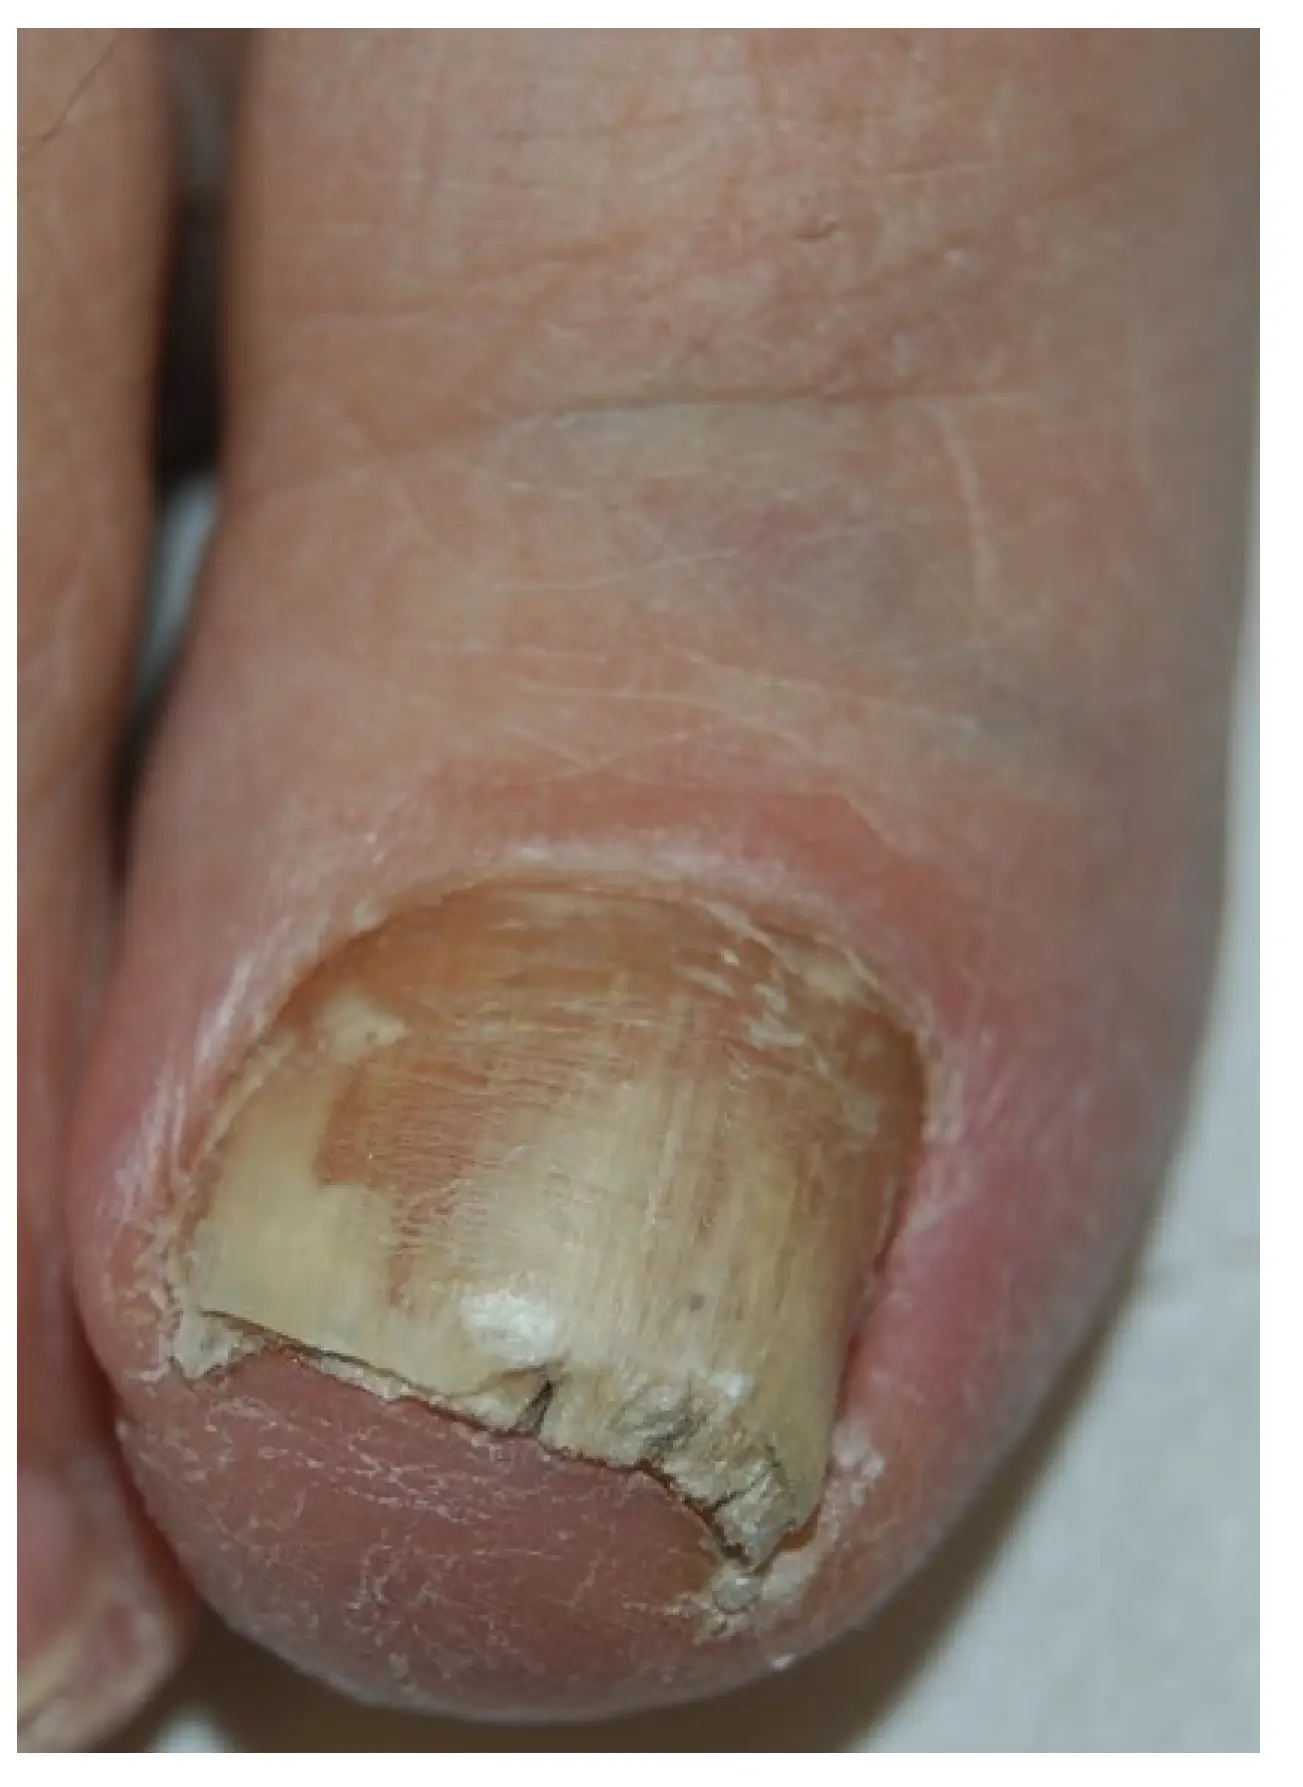 Distal and lateral subungual onychomycosis (DLSO): whitish discoloration, onycholysis and subungual hyperkeratosis.